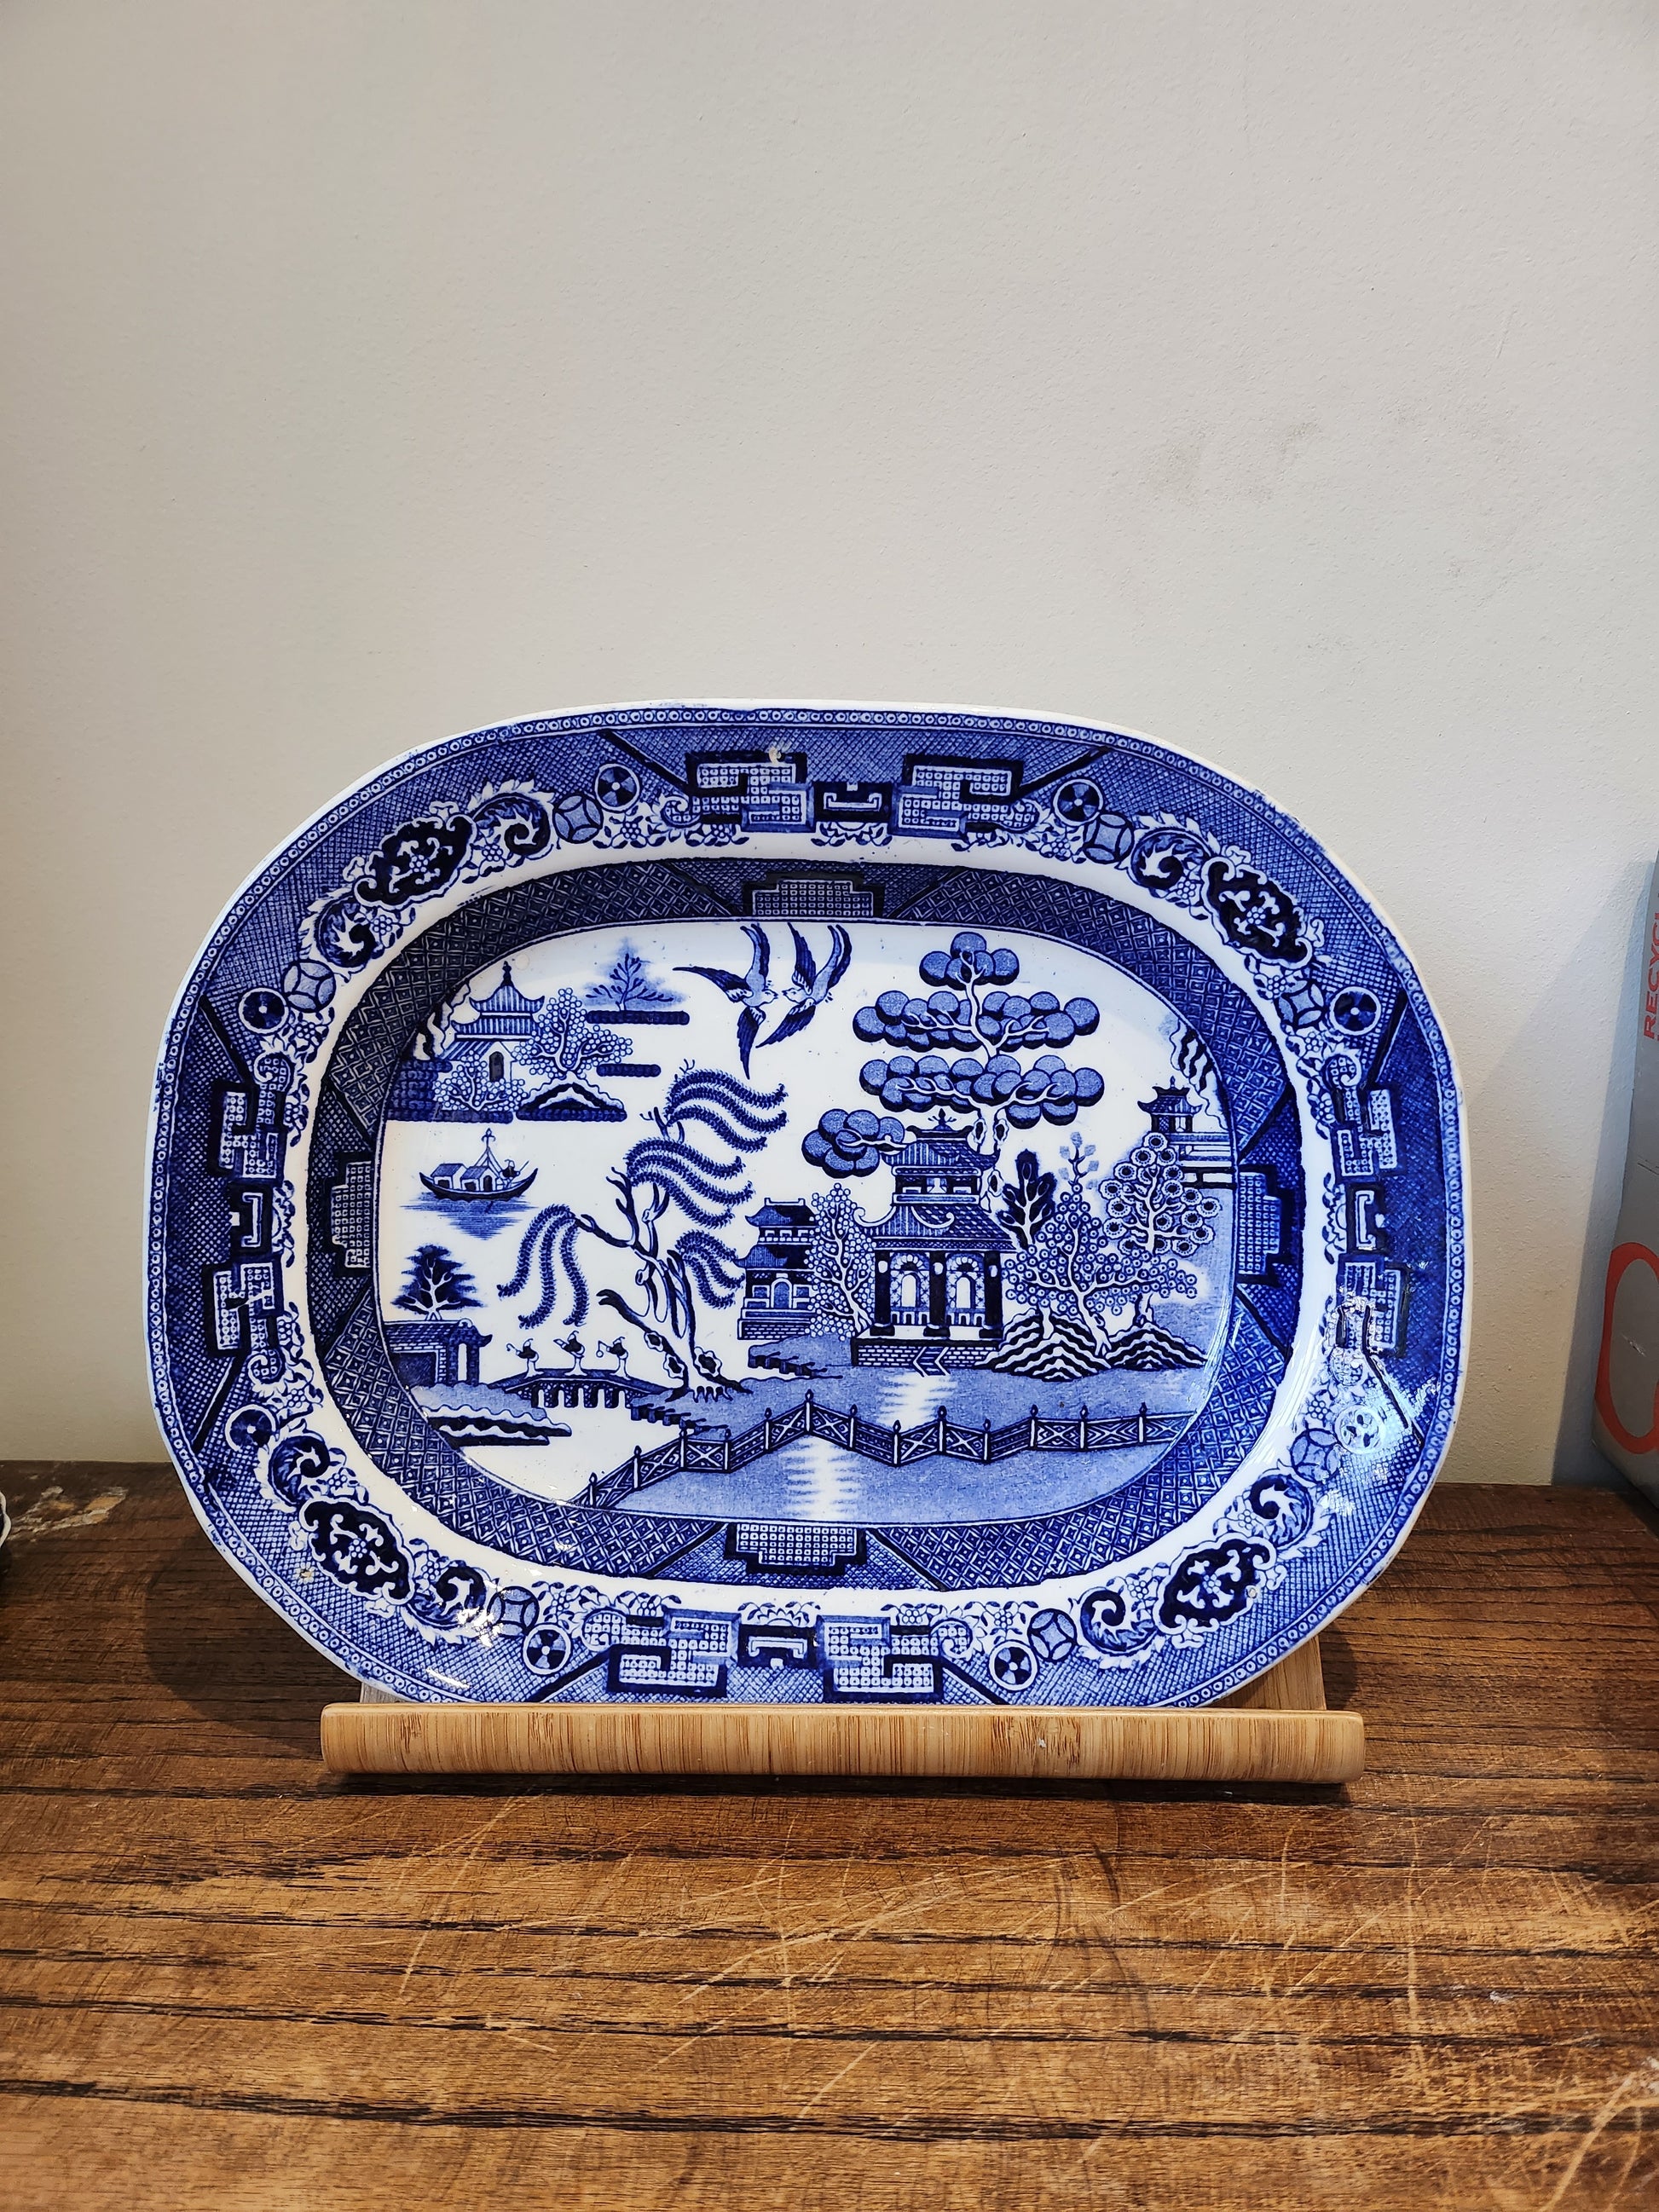 Antique Blue and White Old Willow Big Platter/Serving Dish